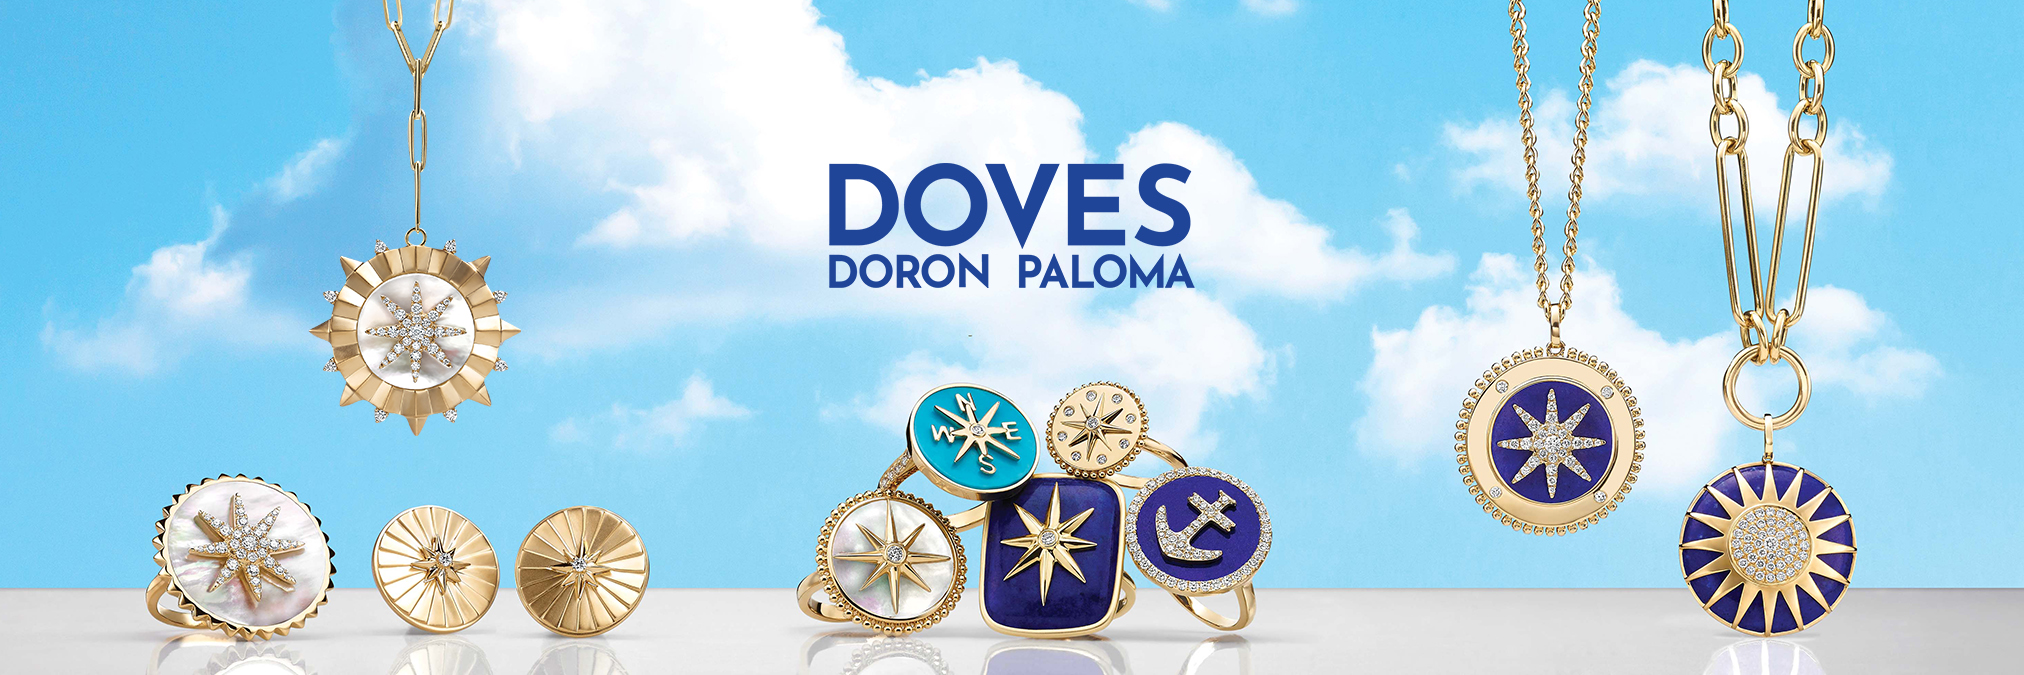 Worthington Jewelers: The Best Jewelry Store in Columbus, OH Doves by Doron Paloma